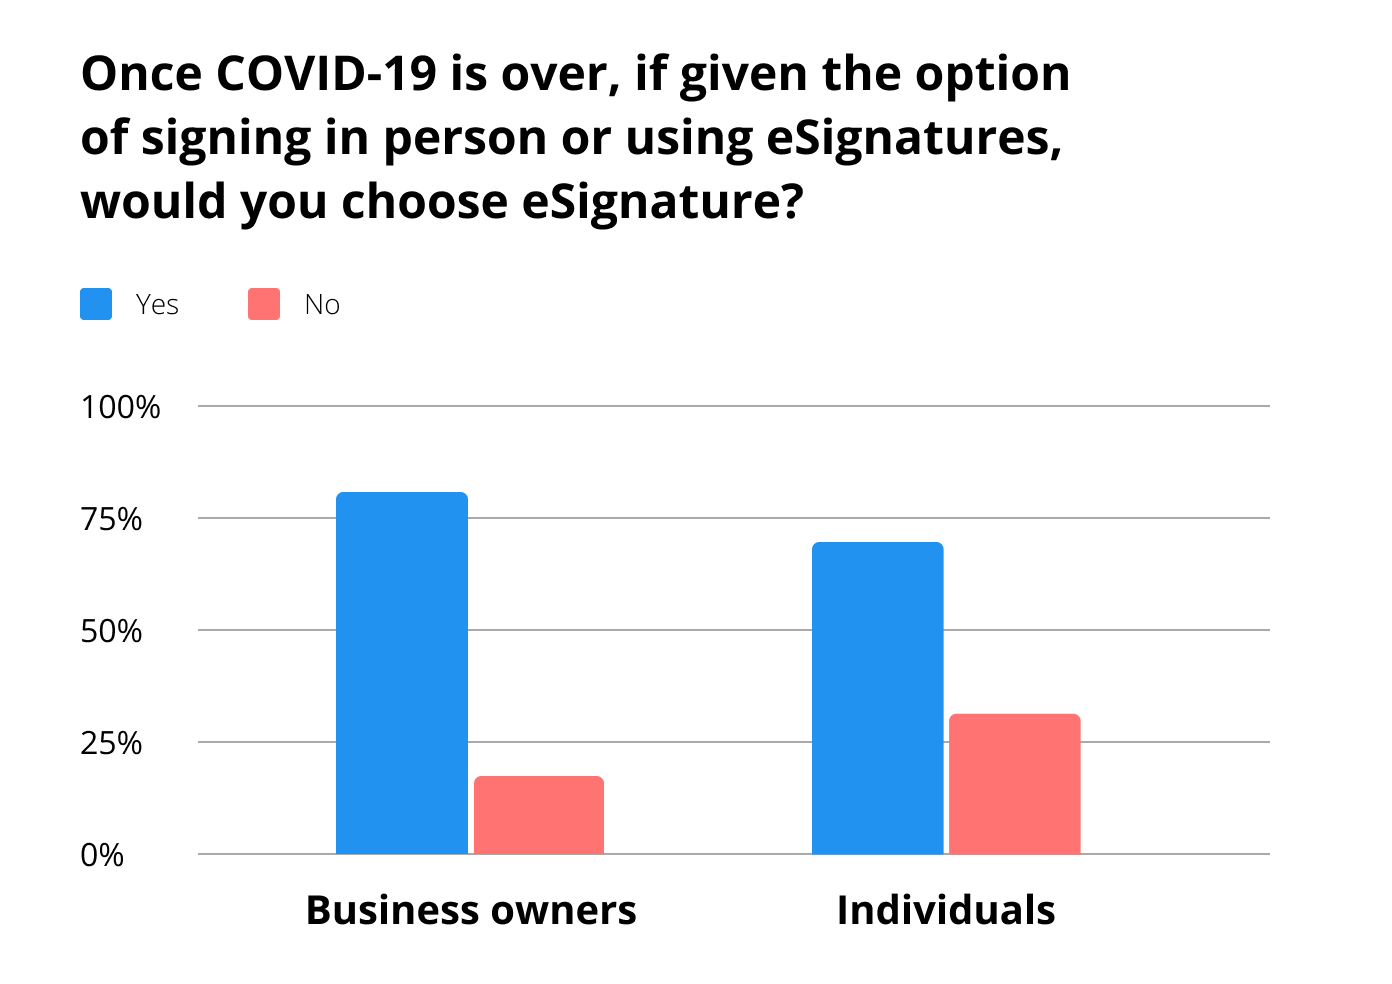 Will US businesses and individuals choose eSignature over signing in person once COVID-19 is over? - comparison diagram